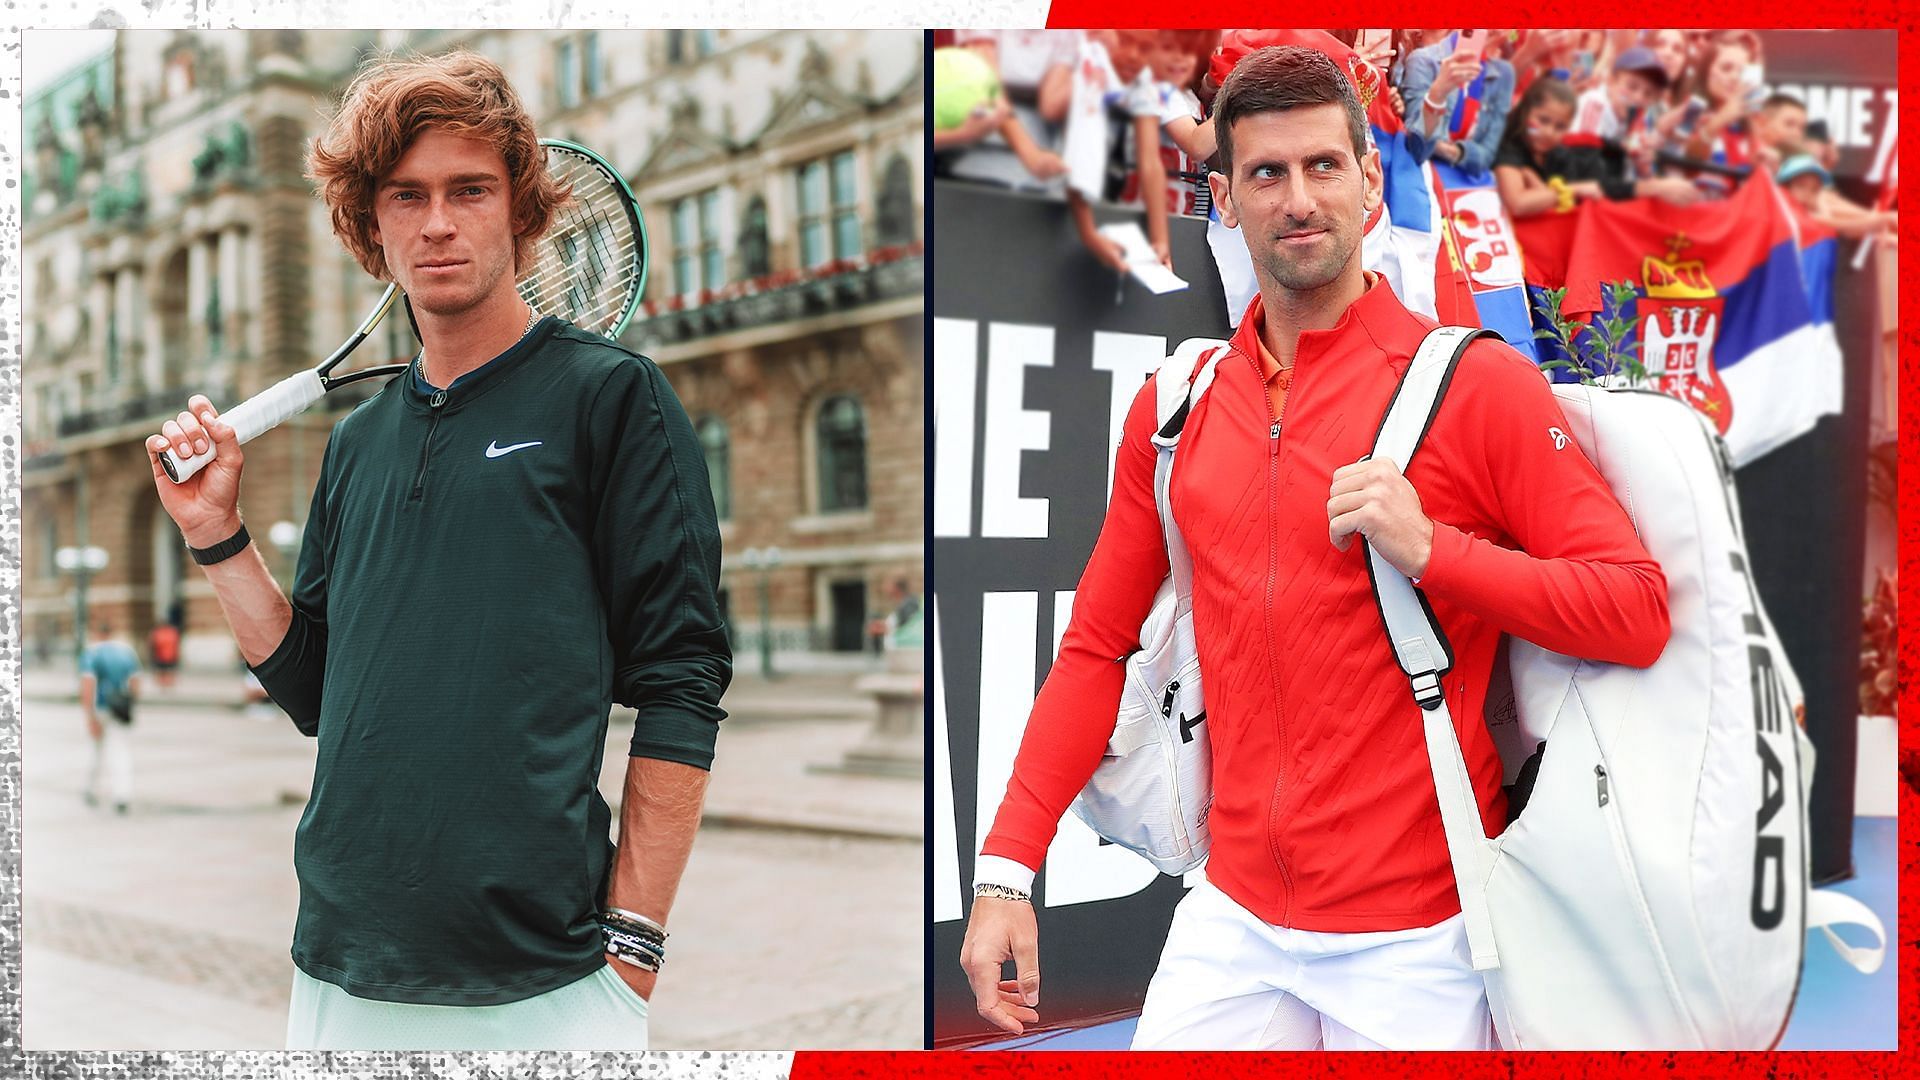 Rublev (left) has hailed Djokovic for started a record-equalling 377th week at No. 1.